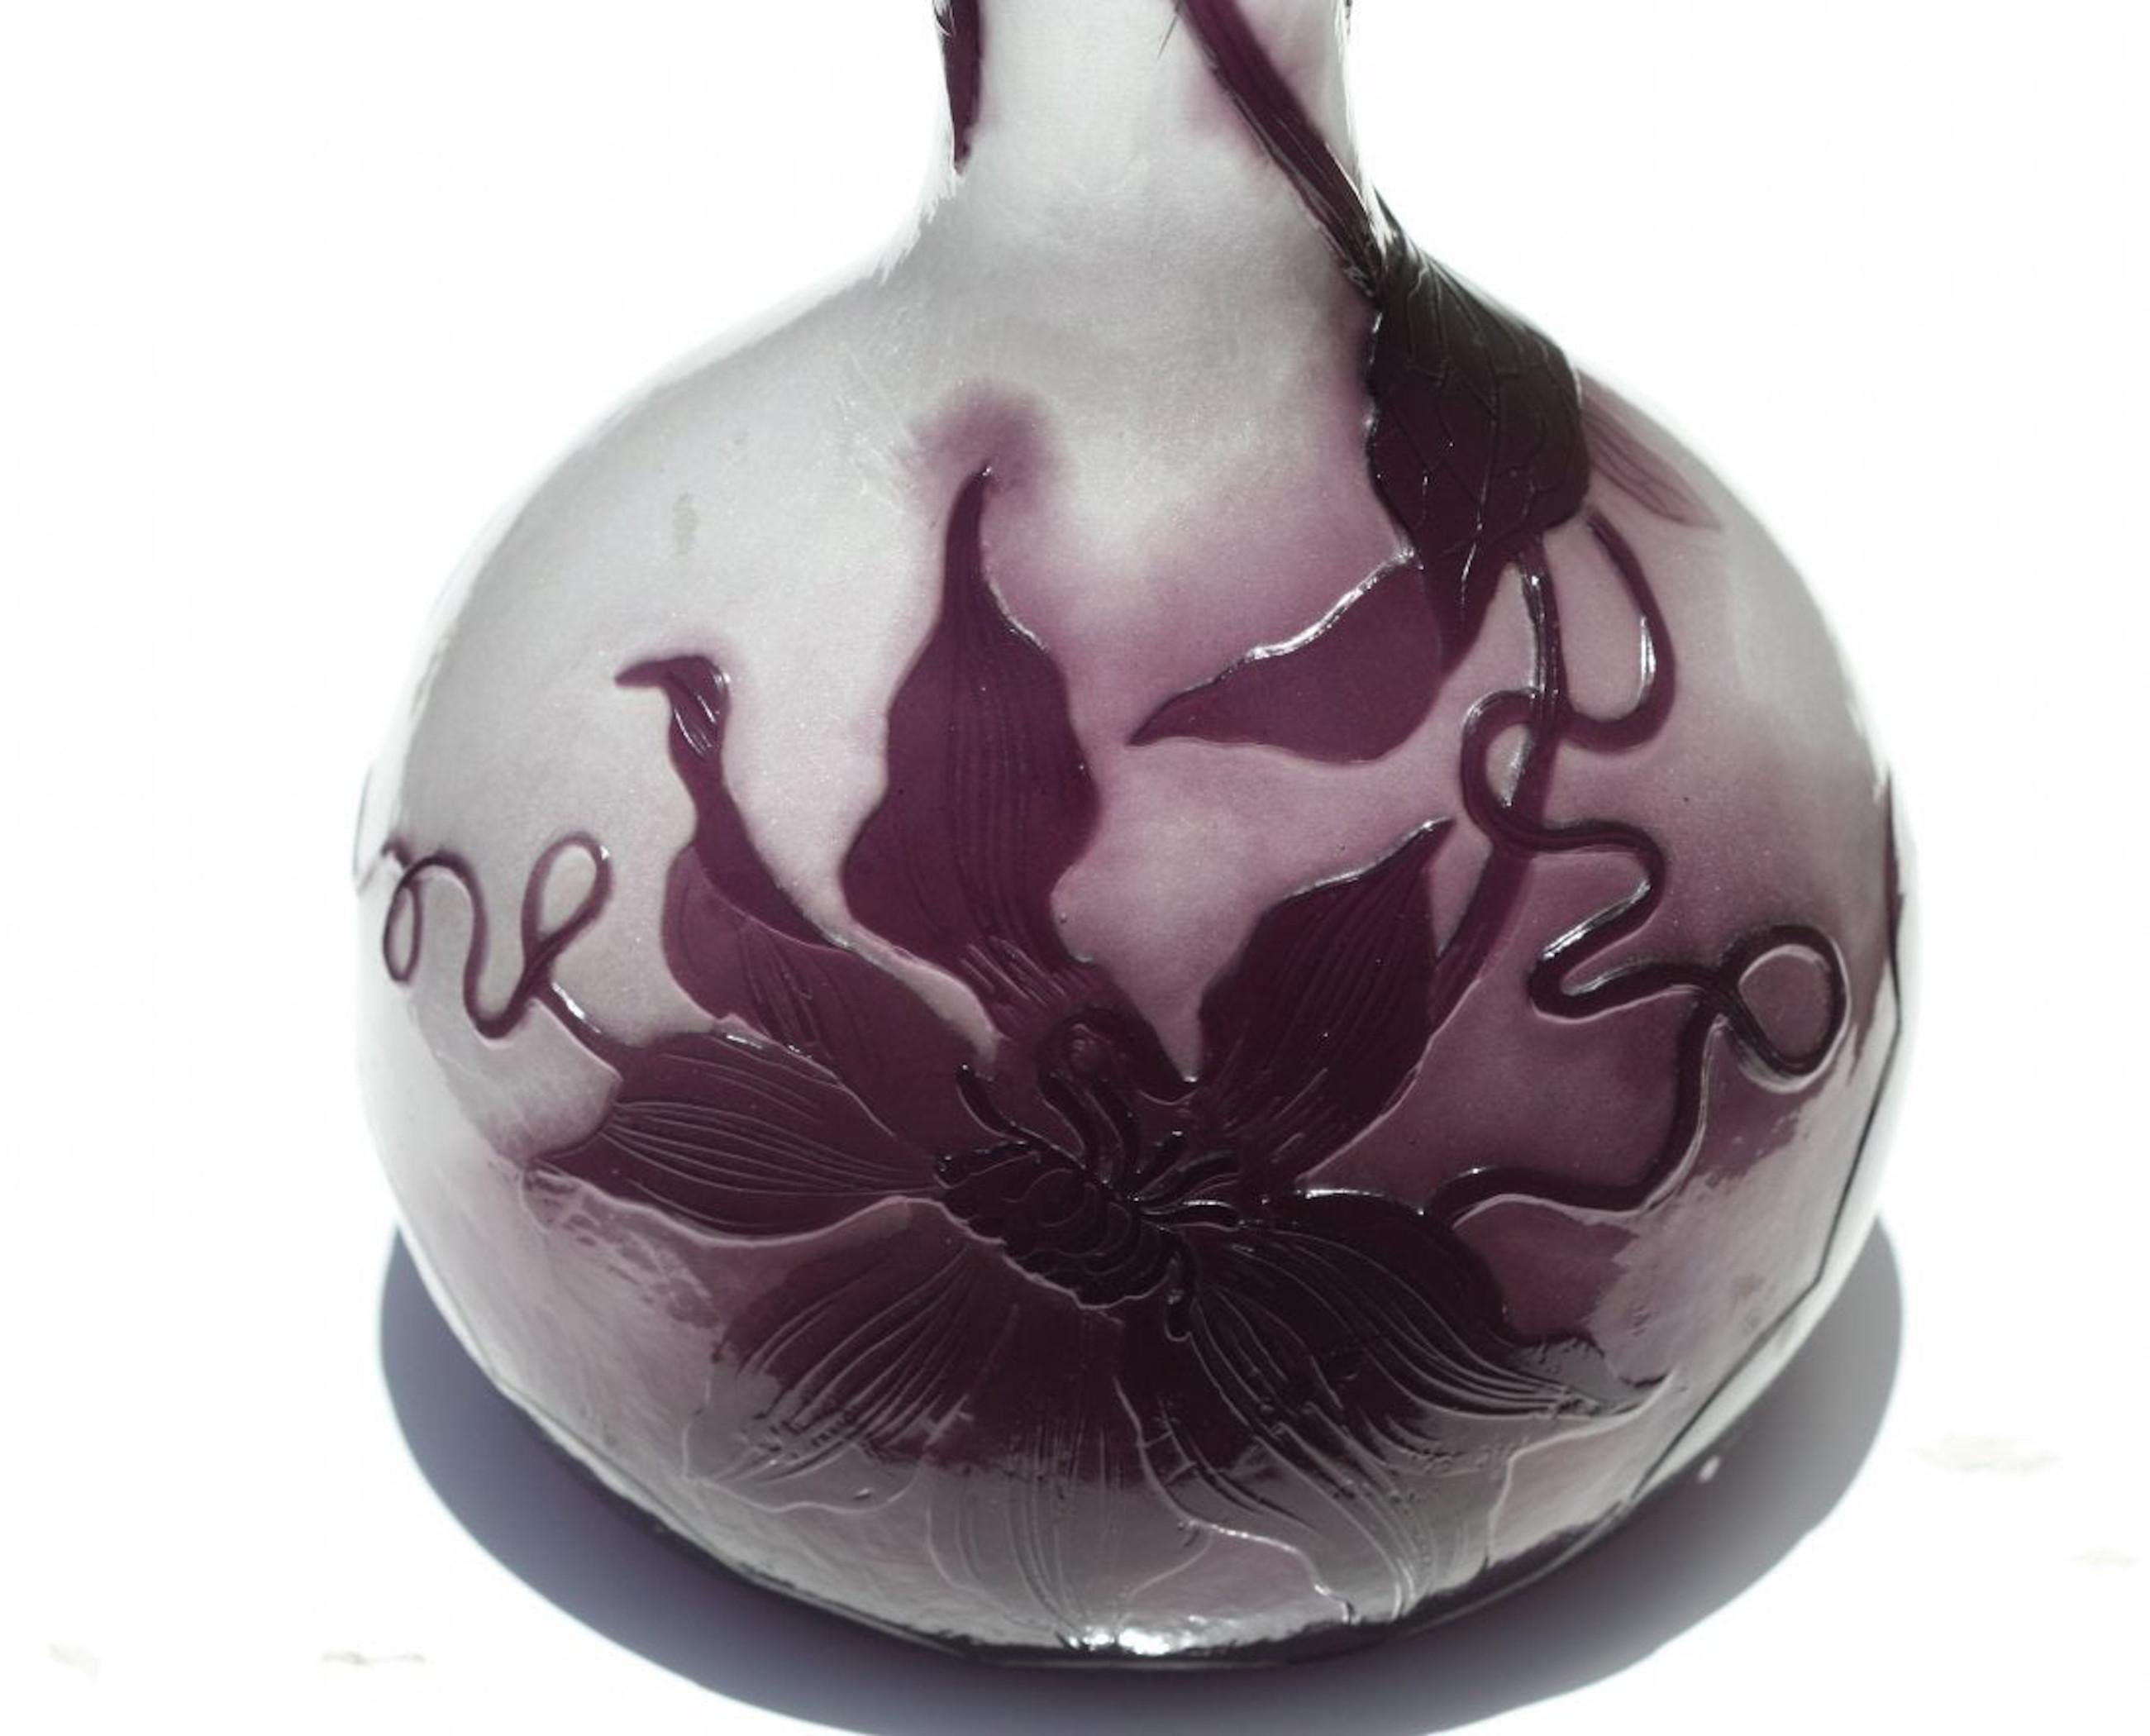 Emile Gallé, French (1846-1904) fine fire-polished vase 
A Fine etched, carved, and fire-polished Cameo Glass Vase 'Lilly', circa 1900. 
Height 13.5 in. (34.29 cm.), 
signed Gallé Depose

Emile Gallé was a master craftsman who skillfully